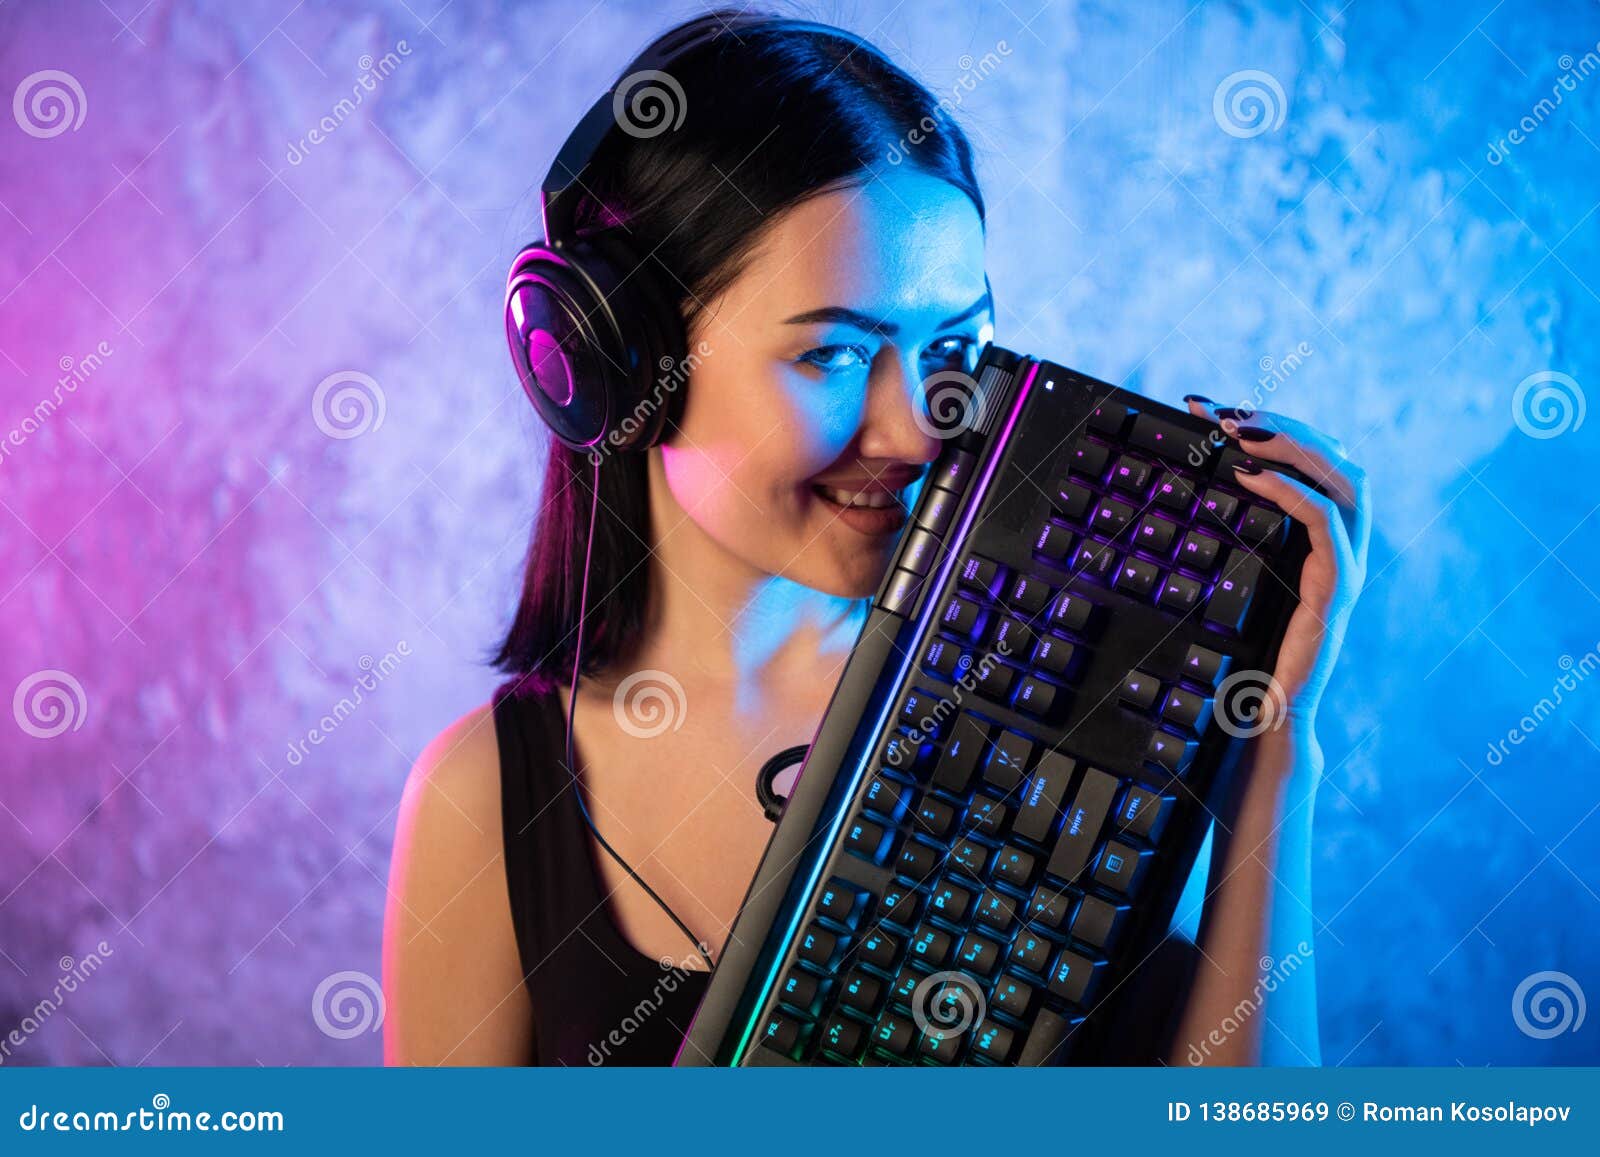 Portrait Of The Beautiful Young Pro Gamer Girl Standing With A Gaming Keyboard And Headset And 